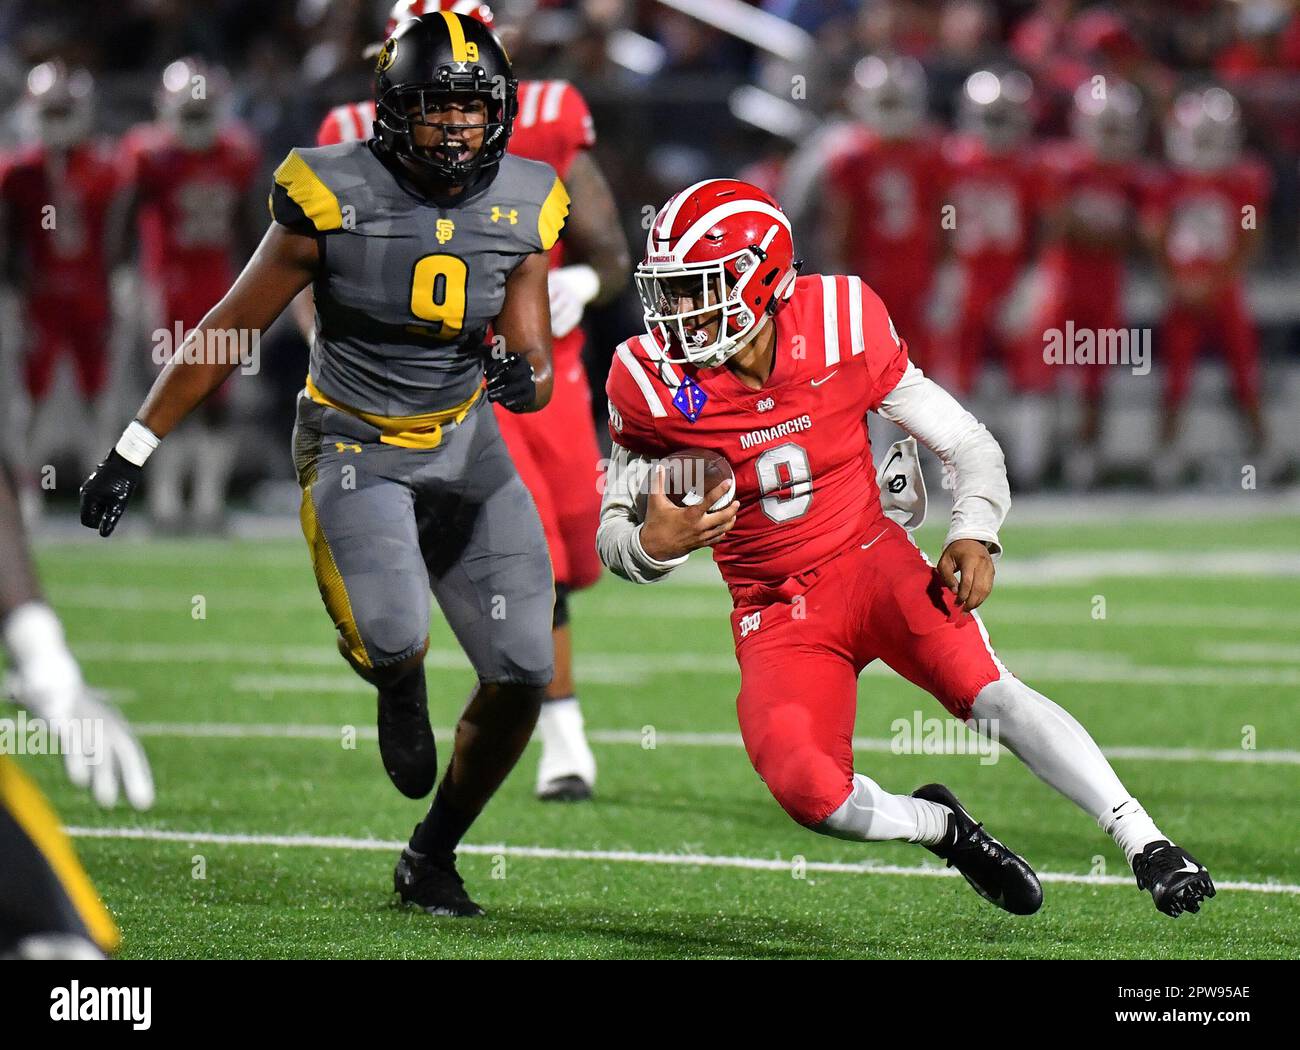 September 14, 2019 Bellflower, CA.Top Prep Quarterback prospect Bryce Young #9 of Mater Dei in action vs. St. Francis Academy Panthers of Maryland.Mater Dei Monarchs vs.St. Francis Academy Panthers of Maryland..Trinity League vs. the USA Showcase.St. Francis Academy Panthers vs. Mater Dei Monarchs in Bellflower, California..Louis Lopez/Modern Exposure/Cal Sport Media. Stock Photo